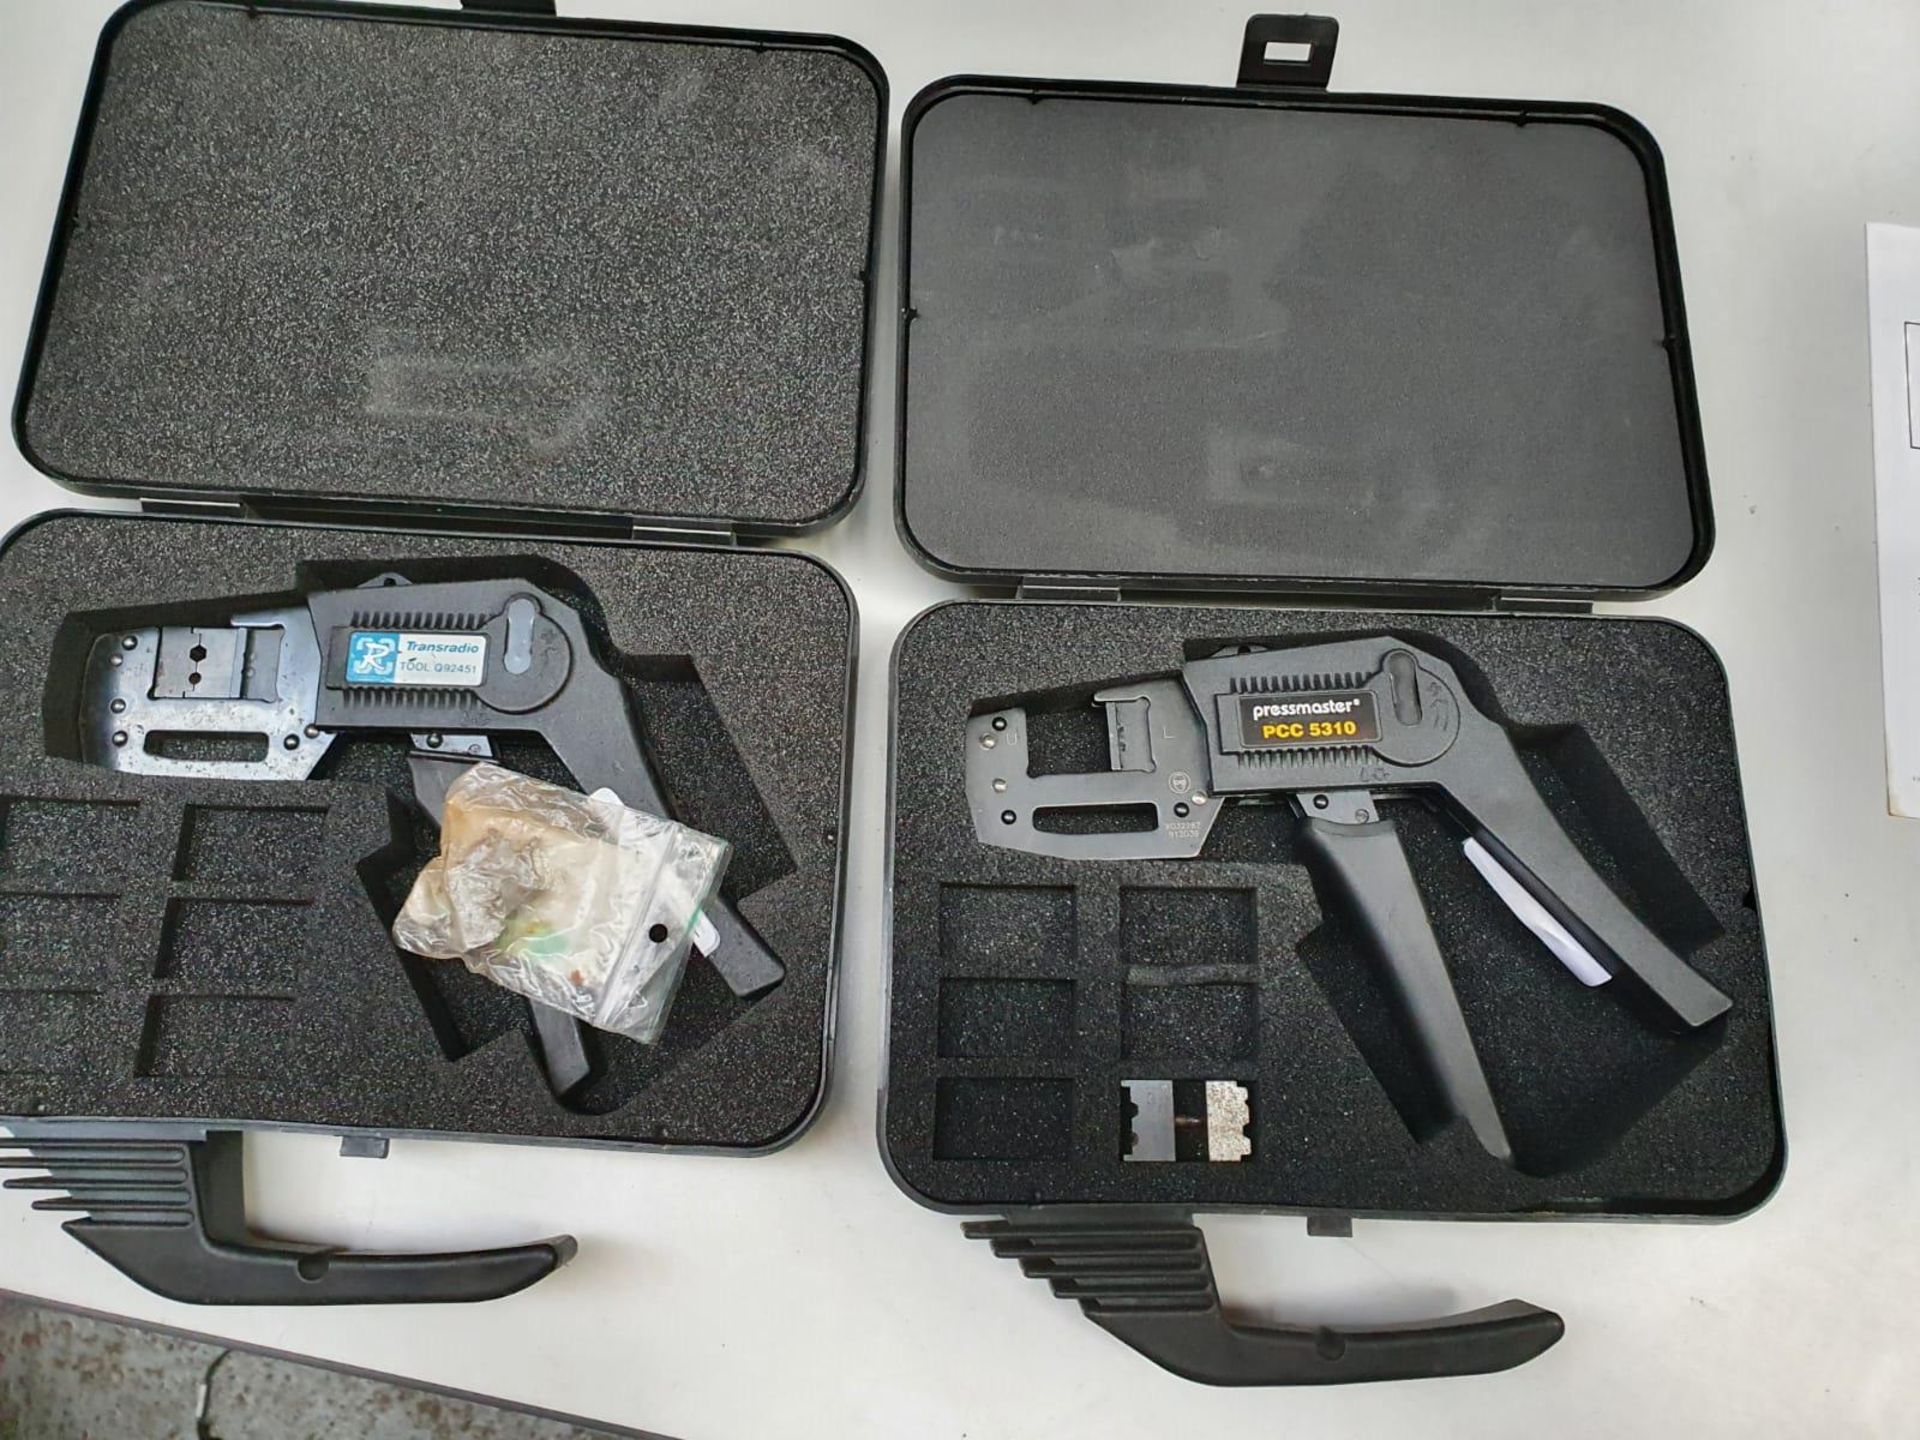 4 x Pressmaster PCC 5310 Crimp Tools With Cases - Includes Accessories - CL011 - WH1 - Location: - Image 4 of 4